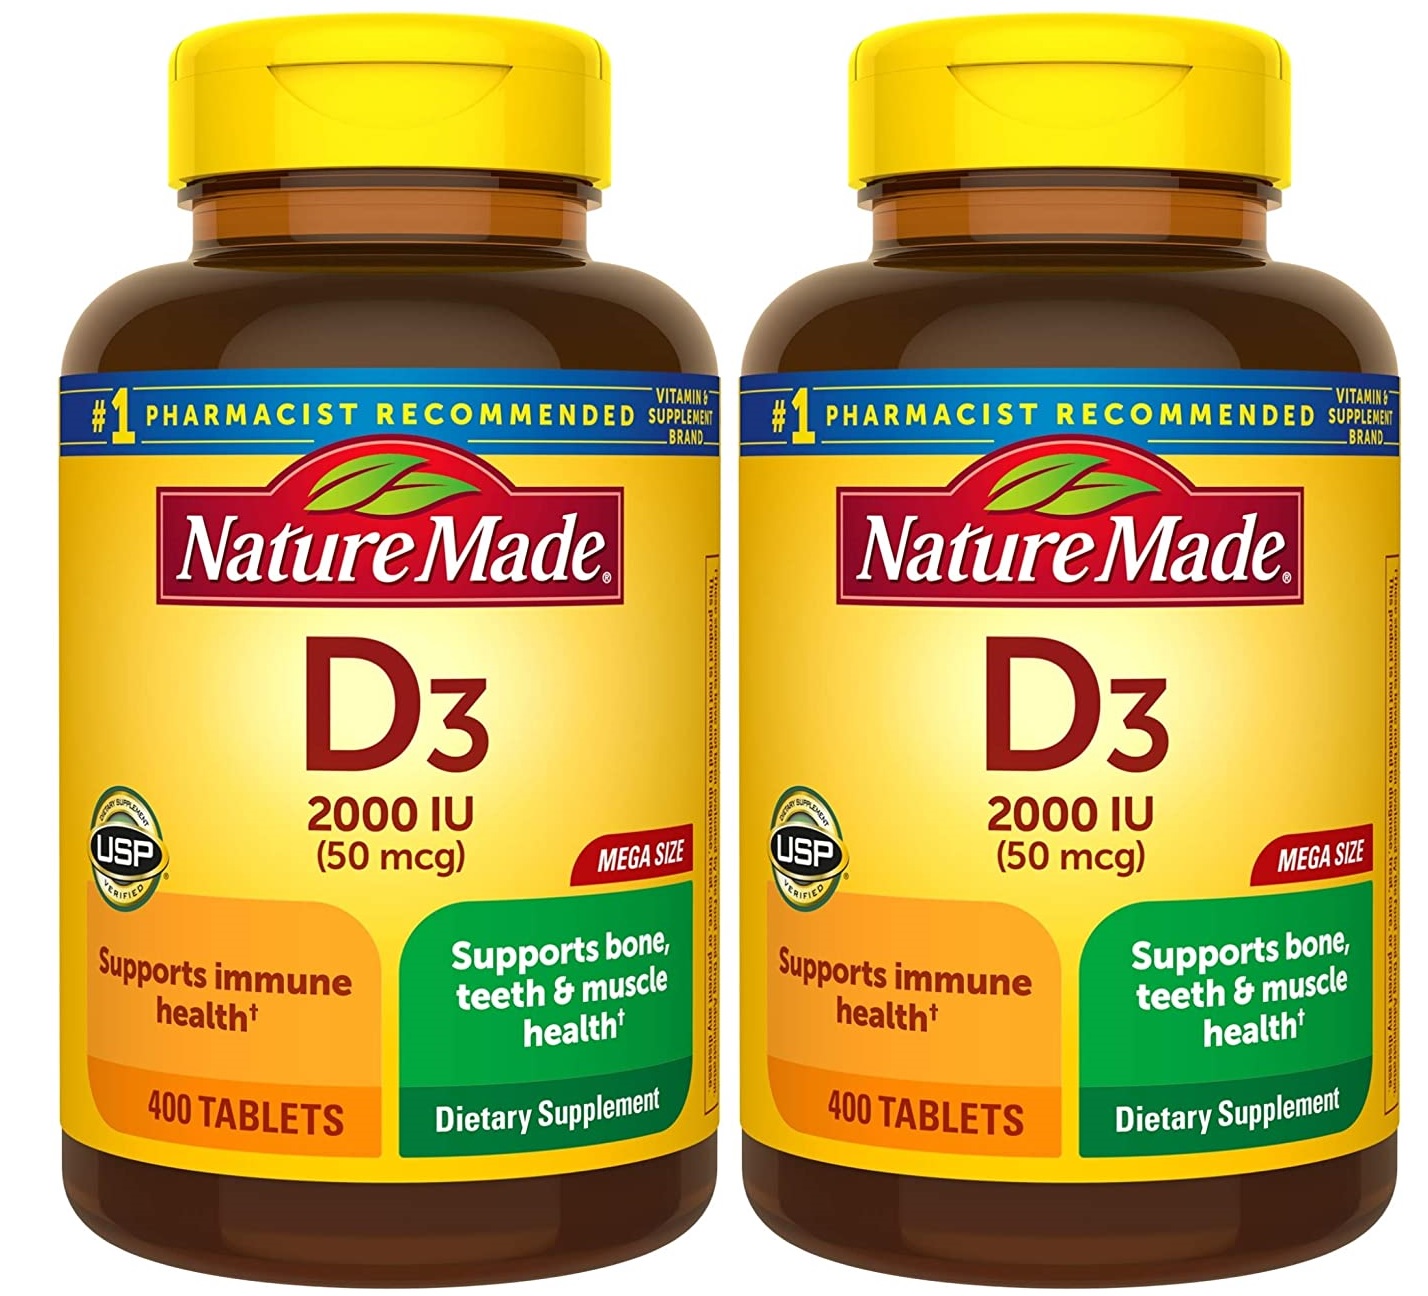 400-Ct Nature Made Vitamin D3 2000 IU 2 for $16.40 ($8.20 each) w/S&S + Free Shipping